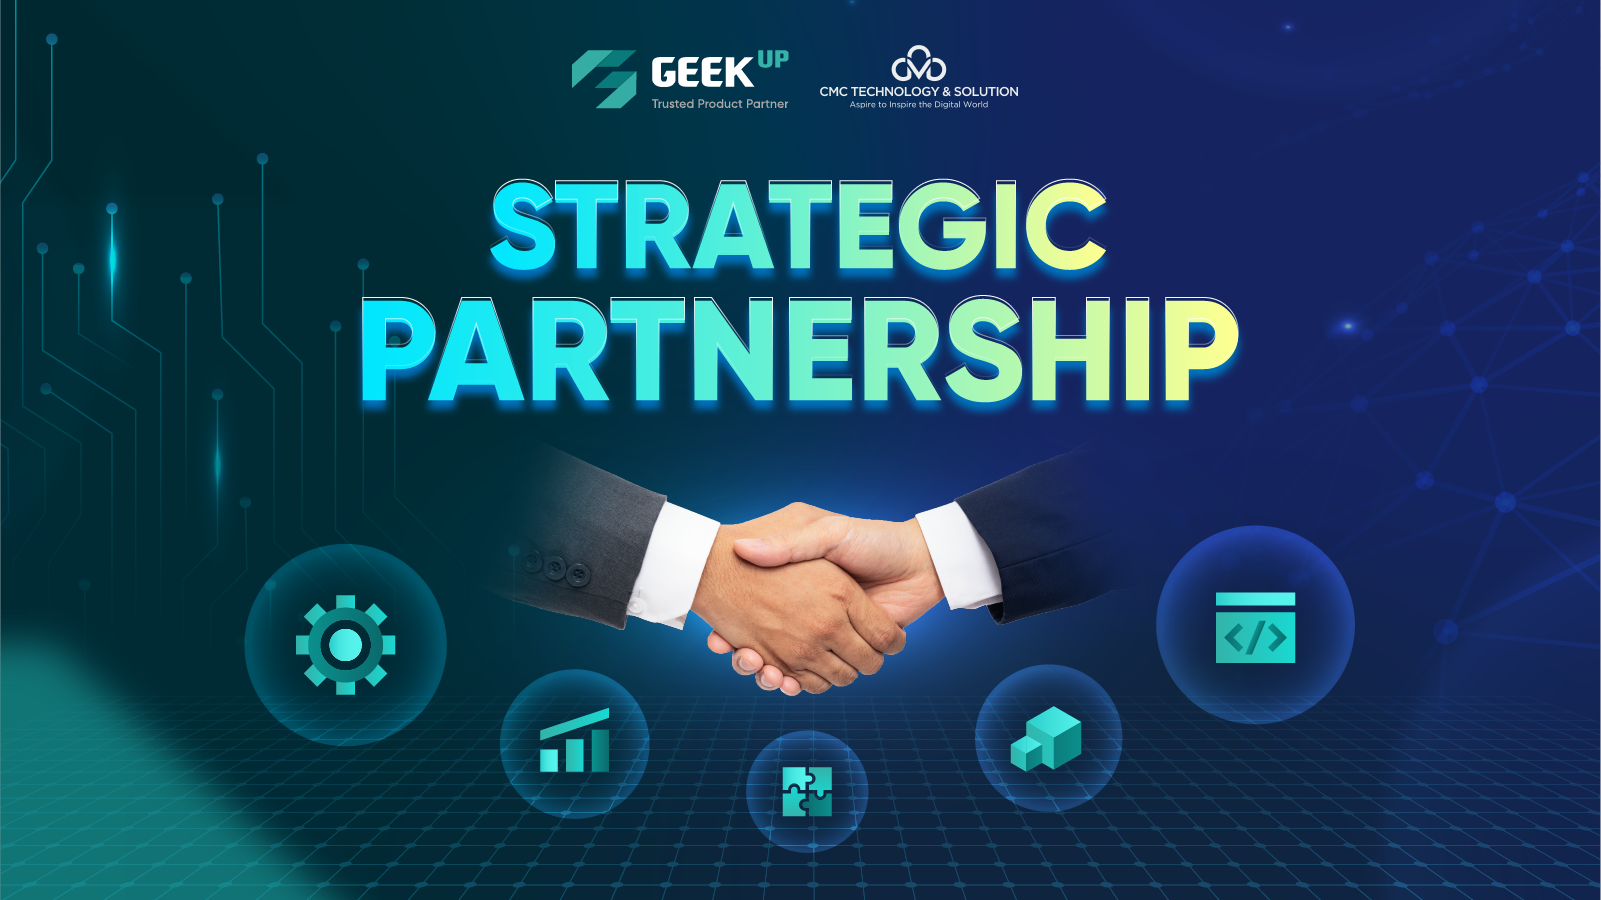 CMC TS and GEEK Up sign a strategic partnership to promote digital transformation